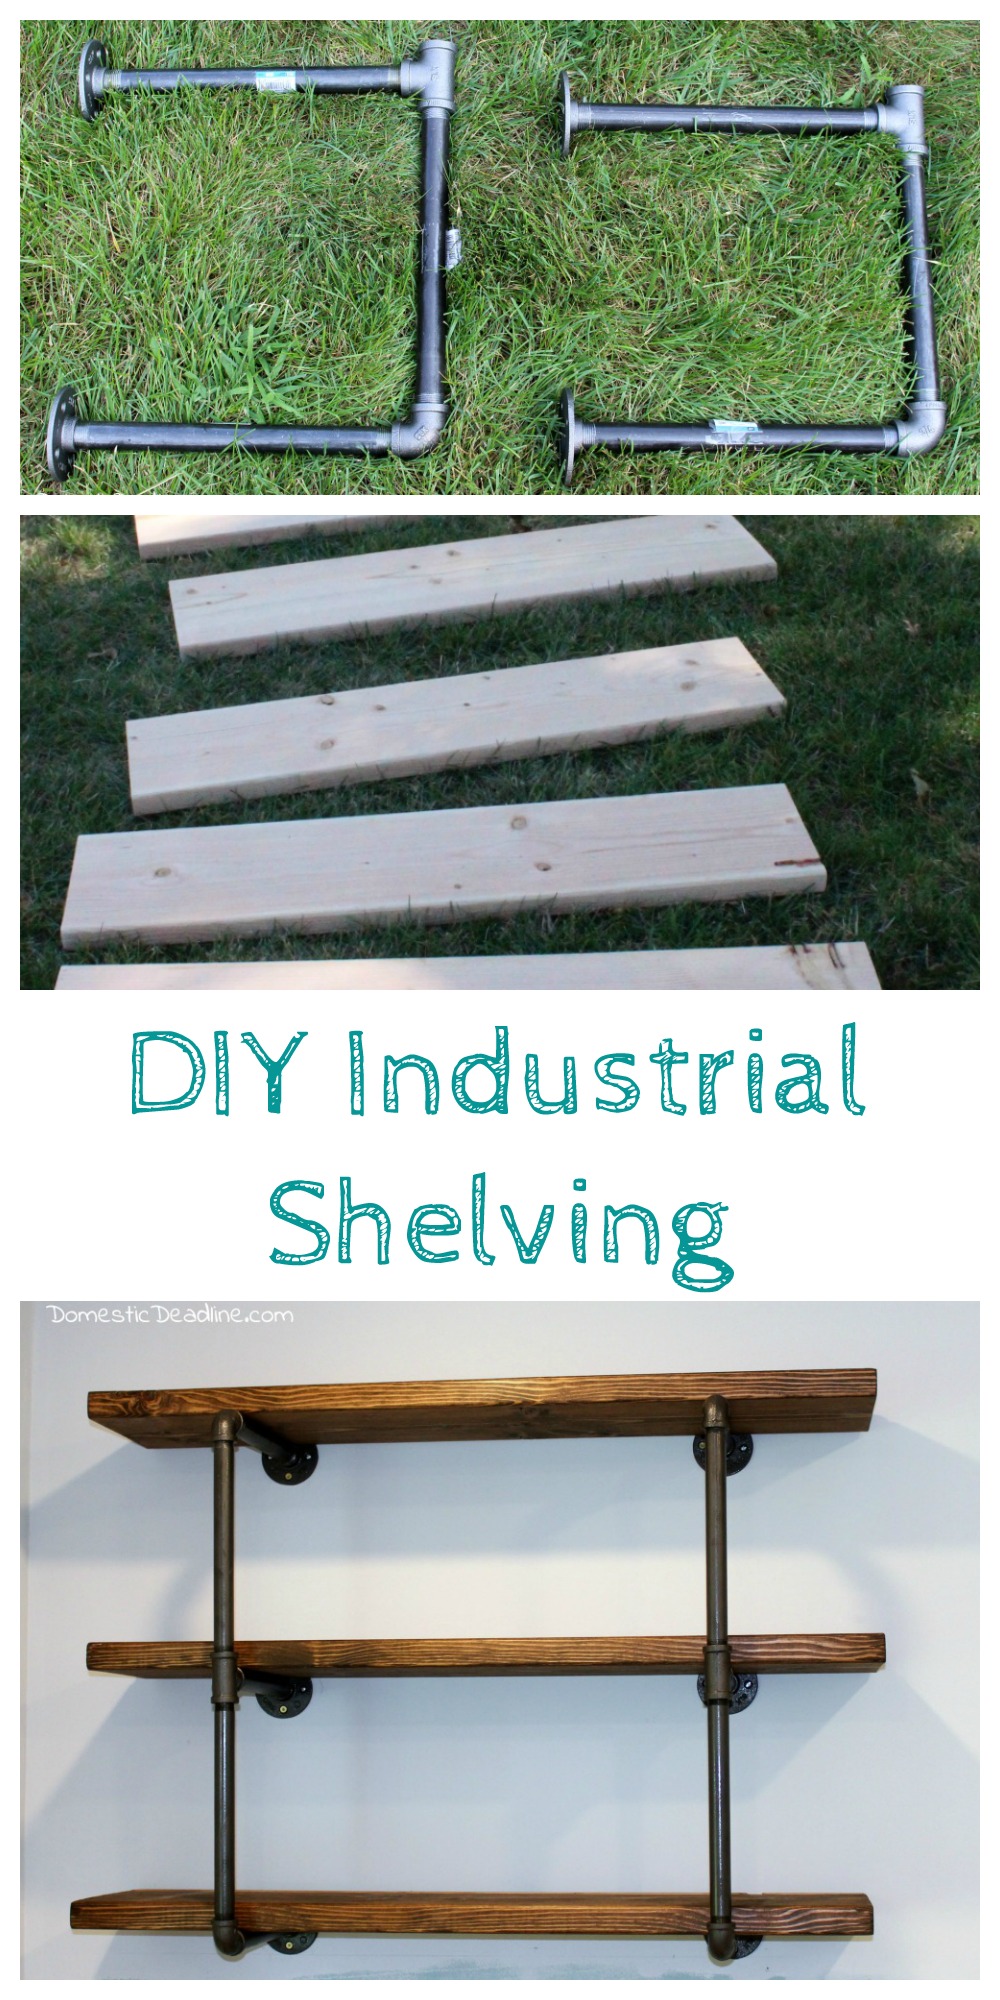 Using iron pipe, thick wood planks, spray paint and stain, I created the perfect industrial shelving for my DIY farmhouse kitchen. I'll show you how on Domestic Deadline